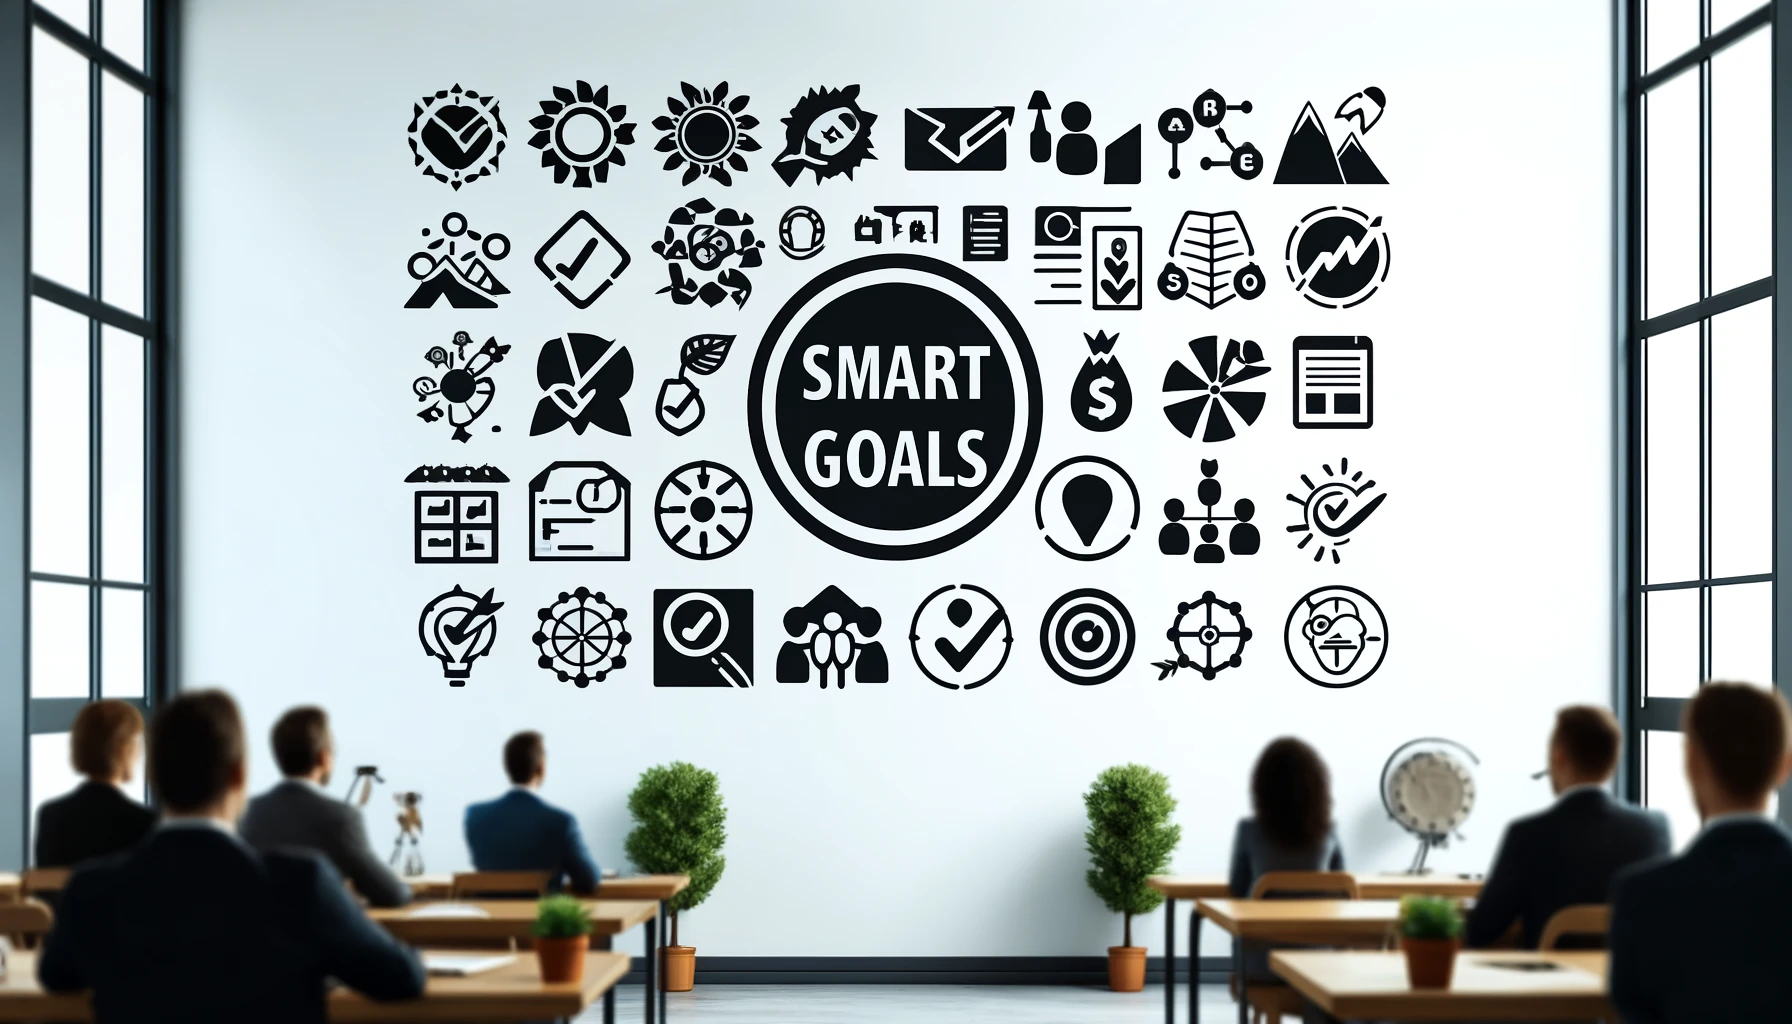 An image illustrating the concept of setting SMART goals using simple and recognizable icons. The icons represent the elements of Specific, Measurable, Achievable, Relevant, and Time-bound goals, effectively conveying the idea of time management for entrepreneurs and productivity strategies for entrepreneur efficiency.